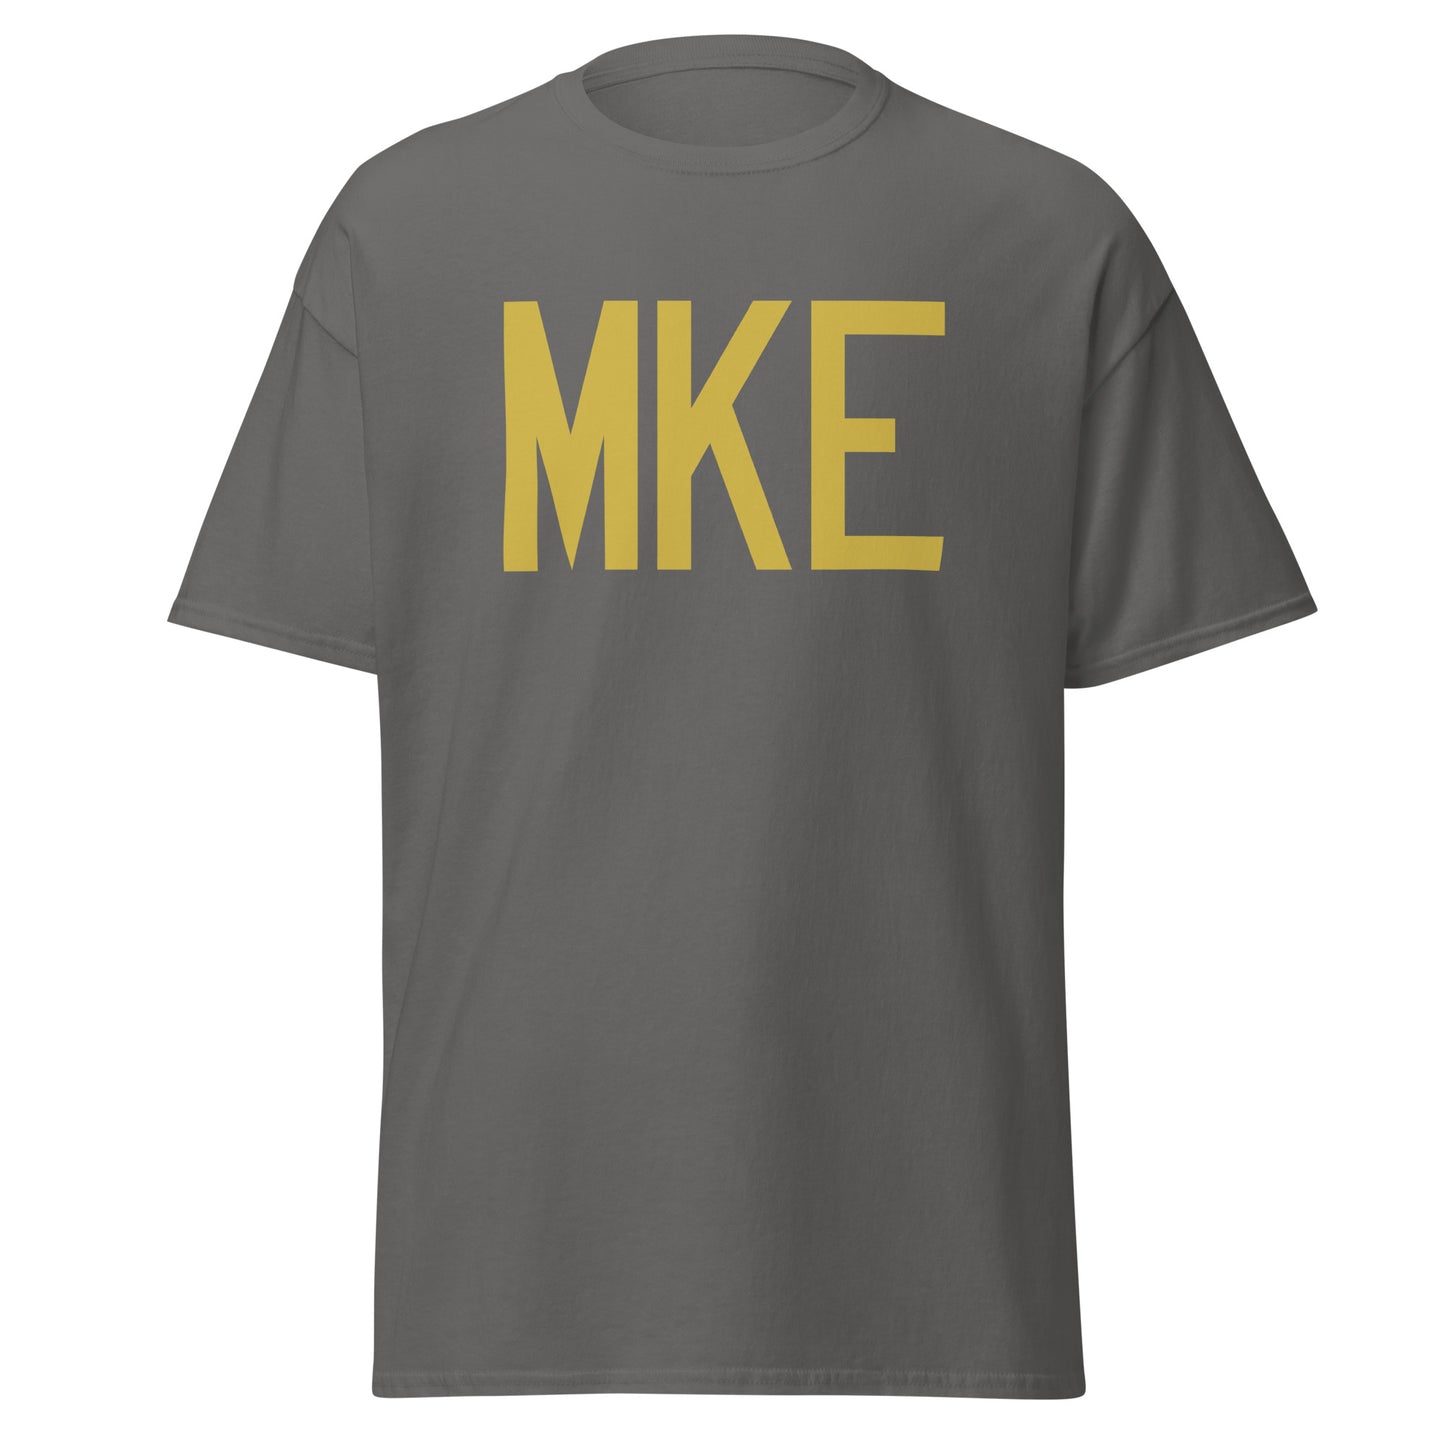 Aviation Enthusiast Men's Tee - Old Gold Graphic • MKE Milwaukee • YHM Designs - Image 05